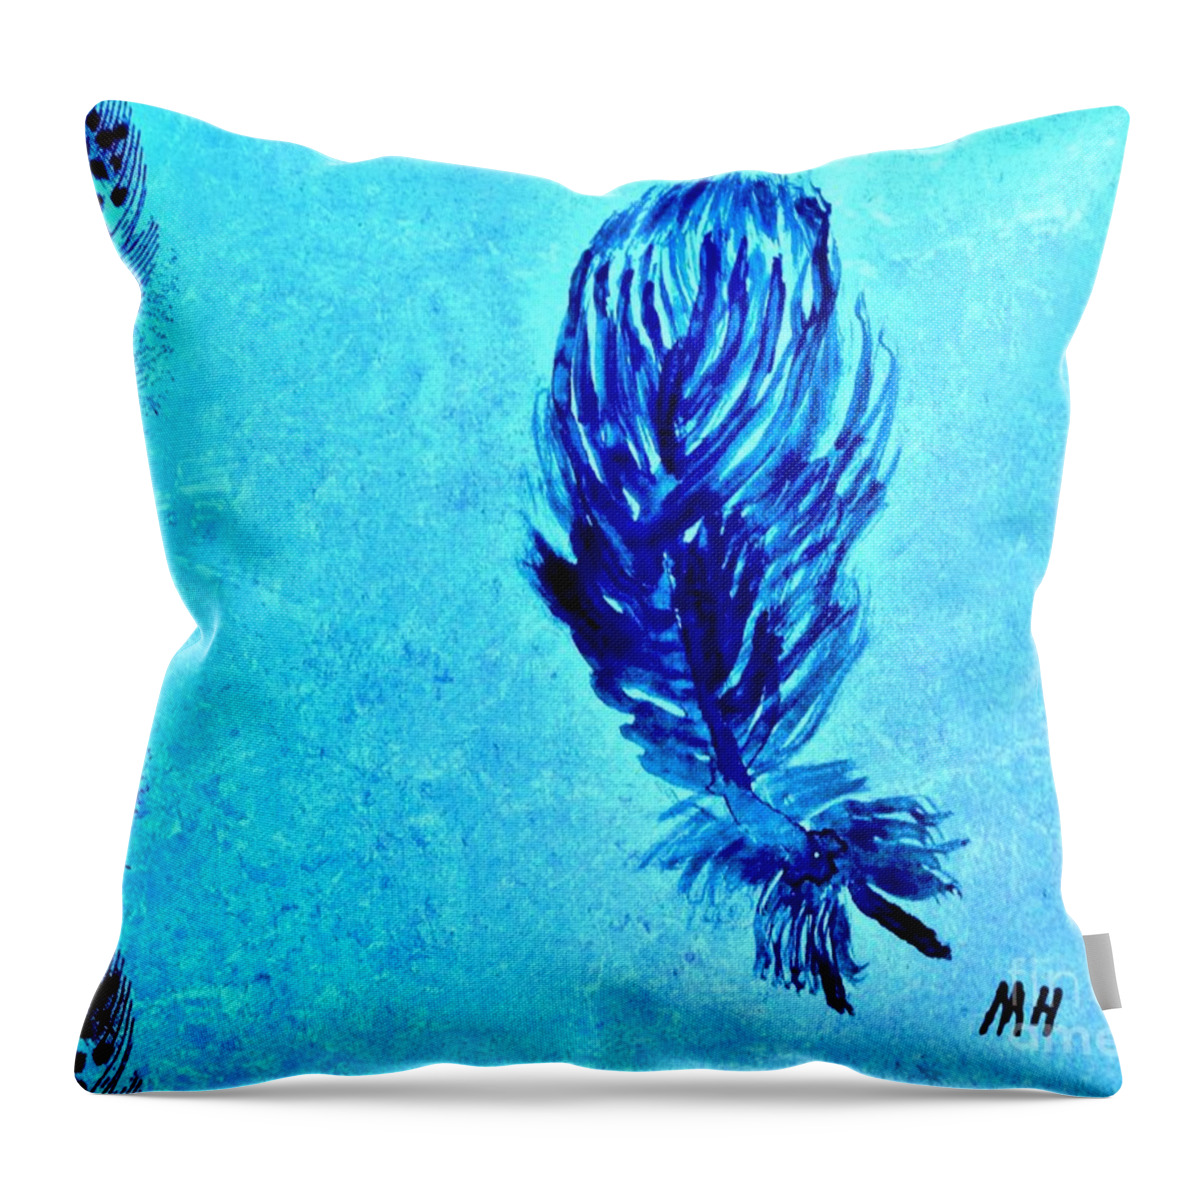 Paint Throw Pillow featuring the painting Painted Feather by Marsha Heiken